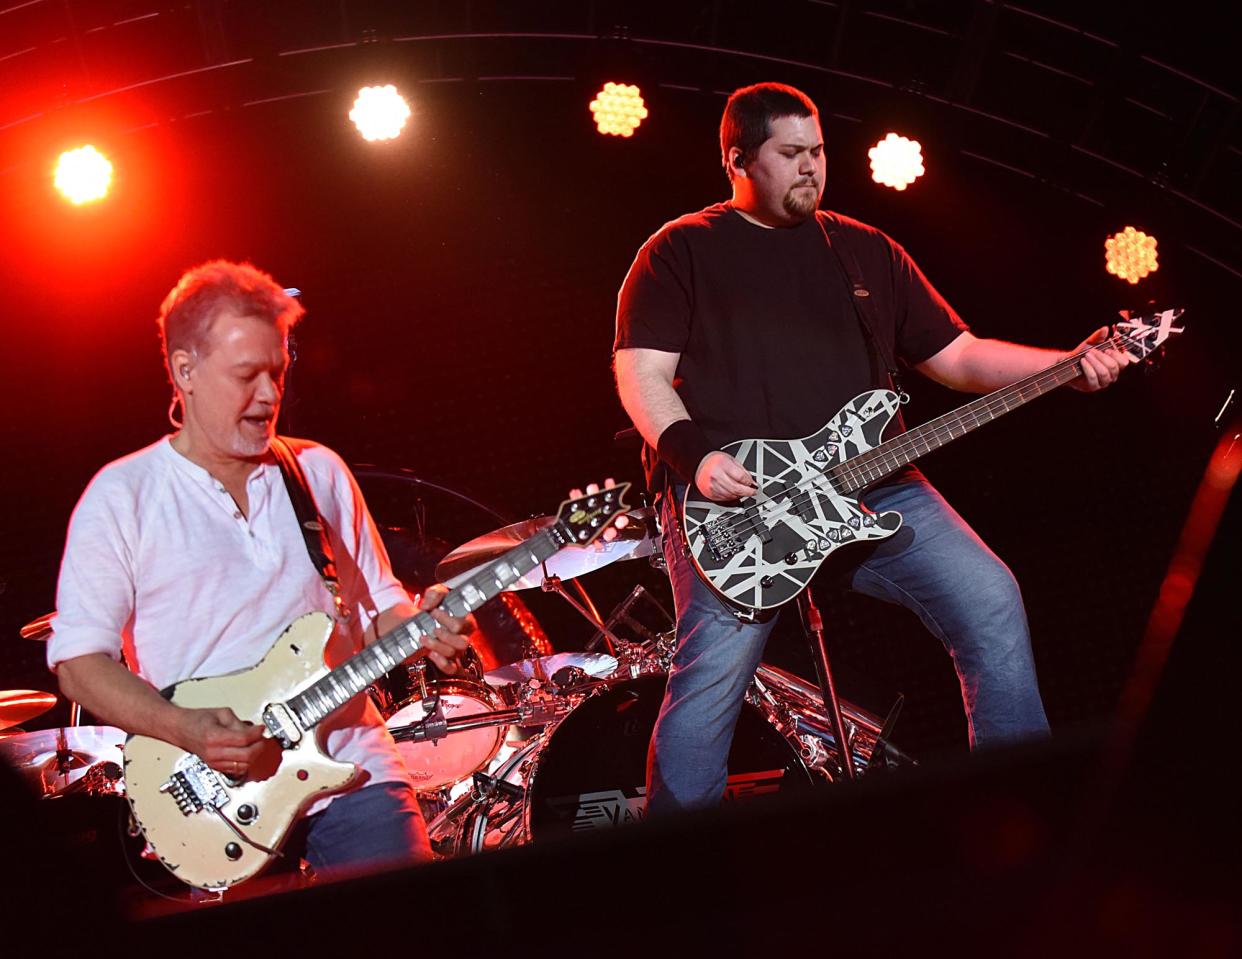 Eddie performing with his son Wolfgang in Atlanta in 2015, on what would be Van Halen’s last tour. A few years before his death, Ed told Blair that his first priority was to help Wolf finish a solo album: “Everything else is secondary!!” - Credit: Chris McKay/Getty Images